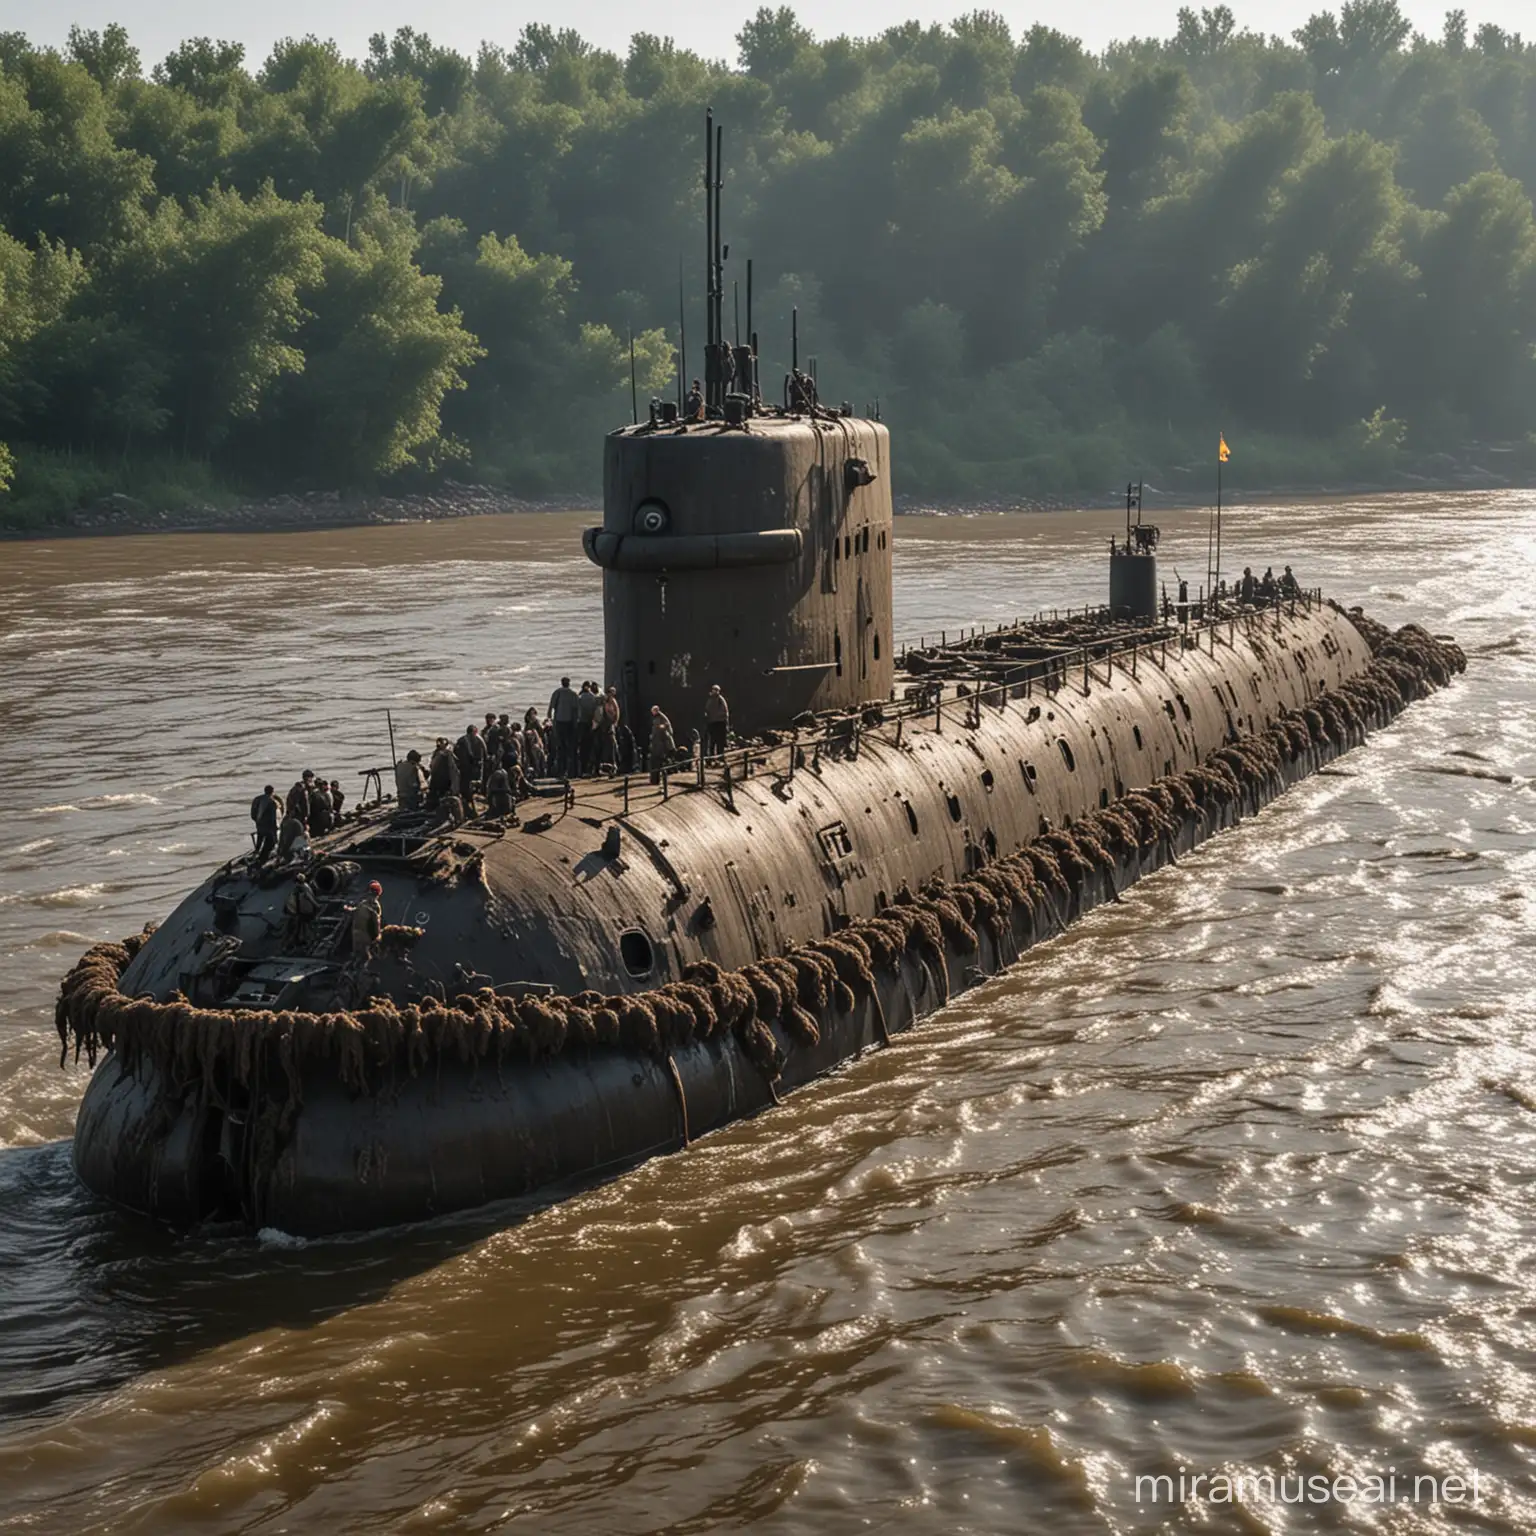 Surreal Scene Shit Submarine Sailing on River of Waste with Crew